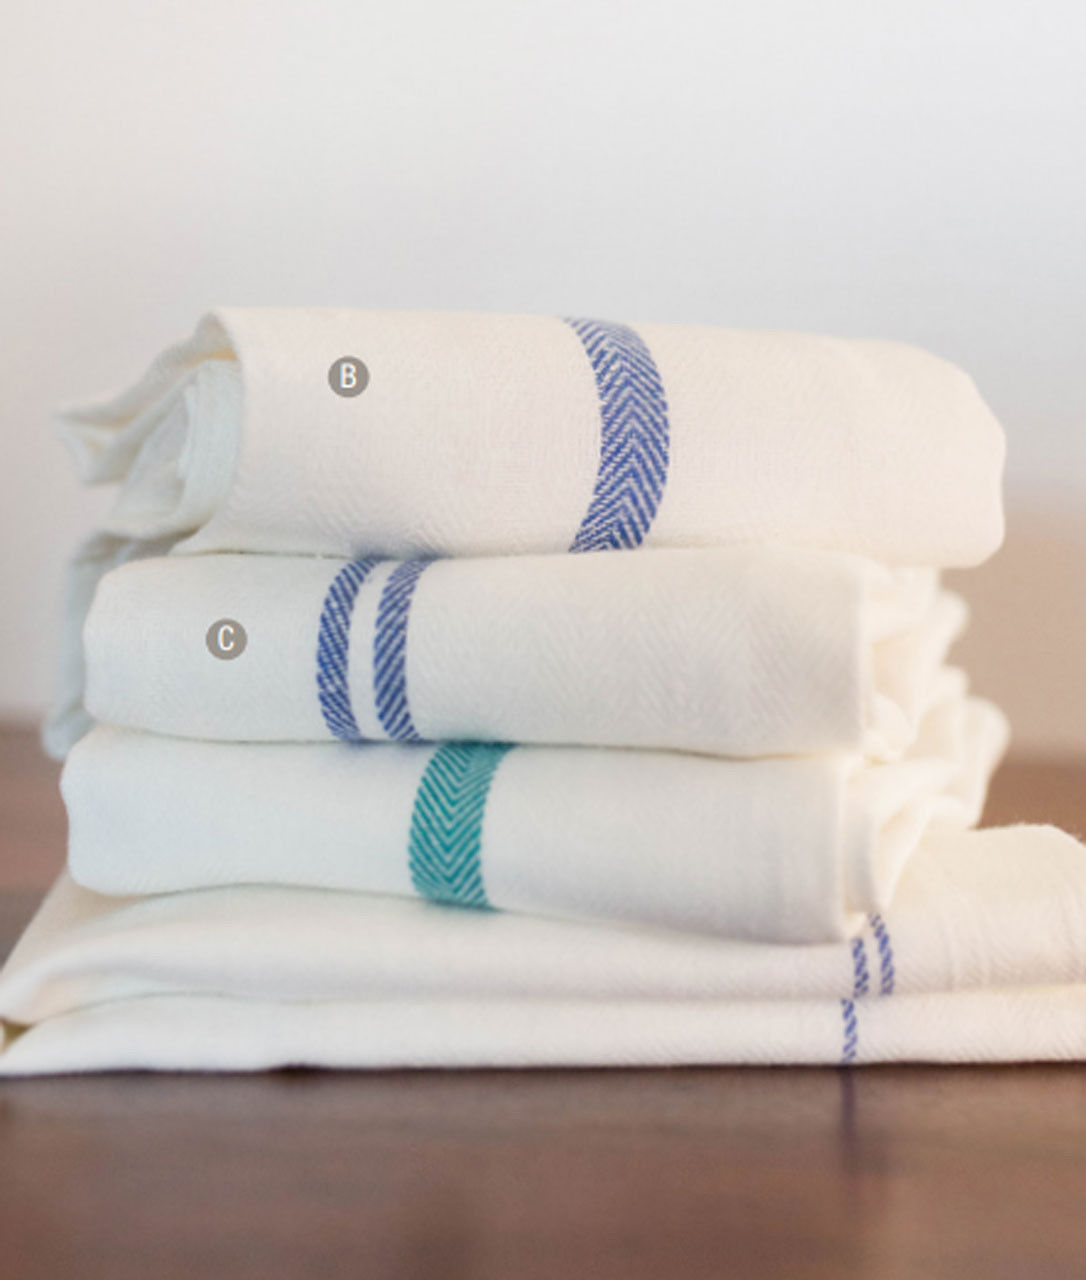 Will 100 percent cotton kitchen towels fit in any kitchen?